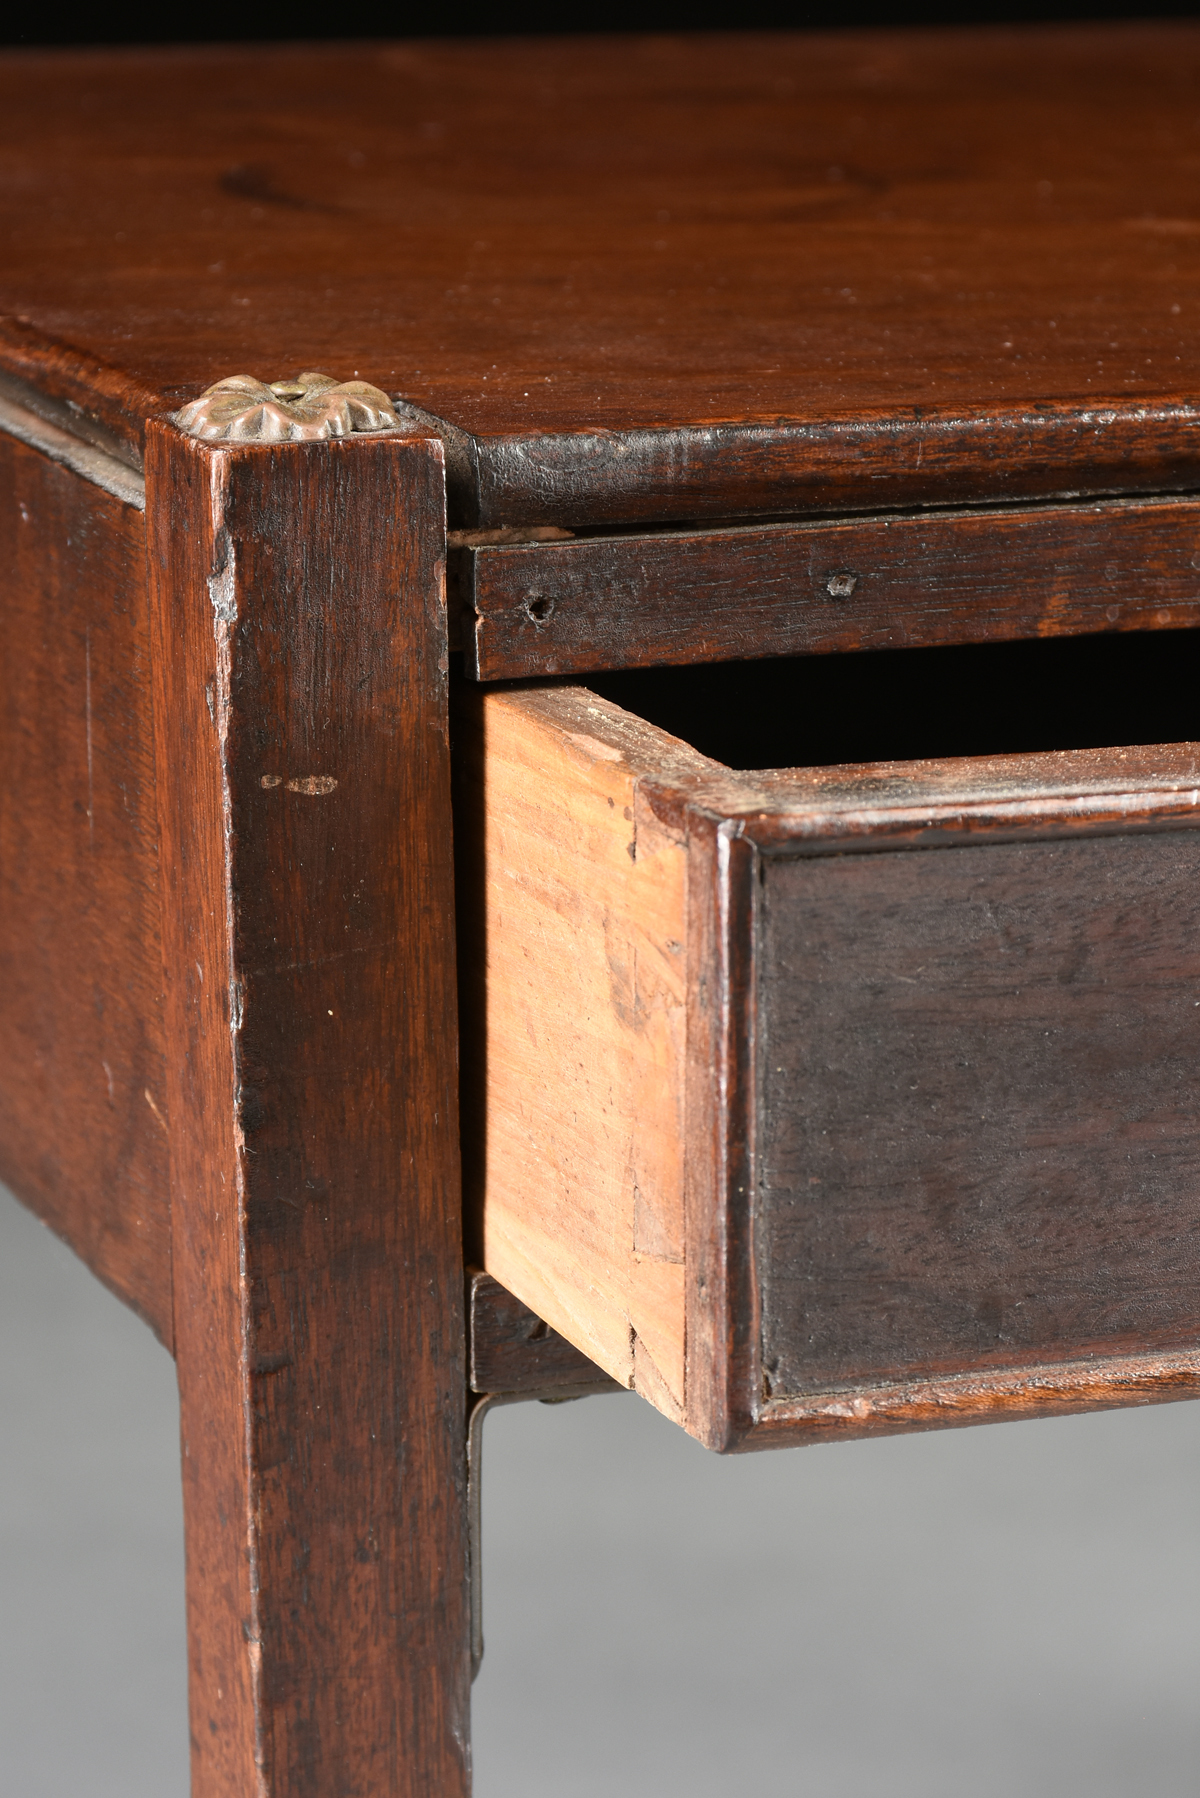 A GEORGE III MAHOGANY LOW SIDE TABLE, LATE 18TH/EARLY 19TH CENTURY, the rectangular top above a - Image 5 of 6